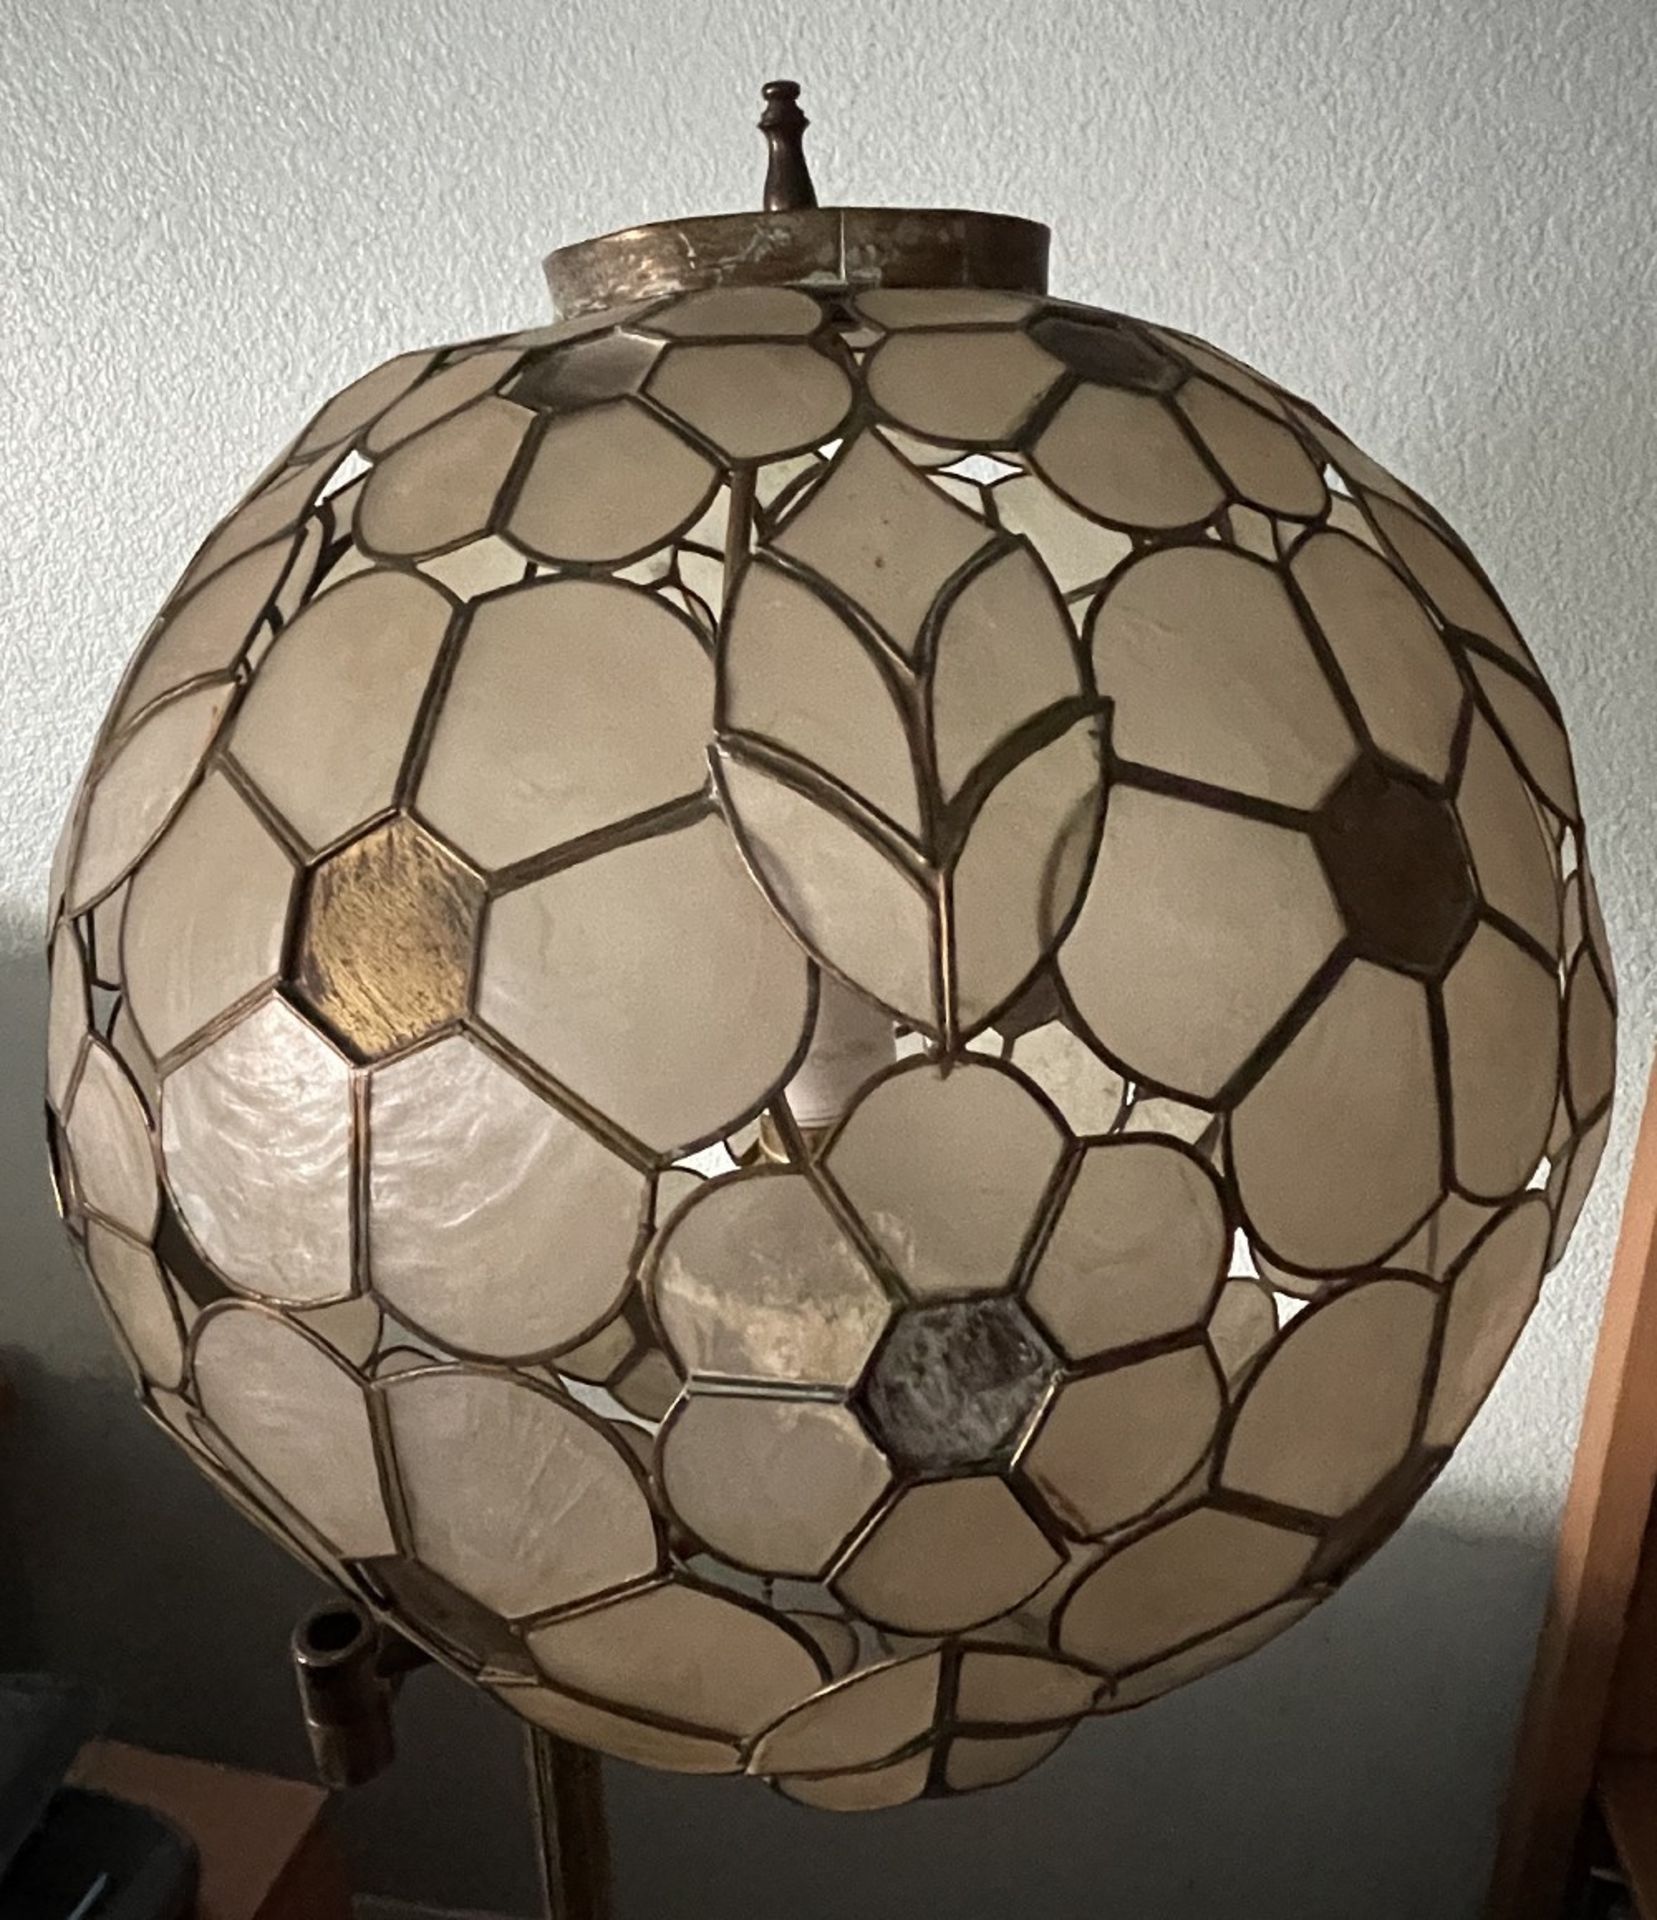 Antique Tortoise Shell Lamp in Brass Finish, approx 5' Tall. Very Rare/Unique. - Image 6 of 11